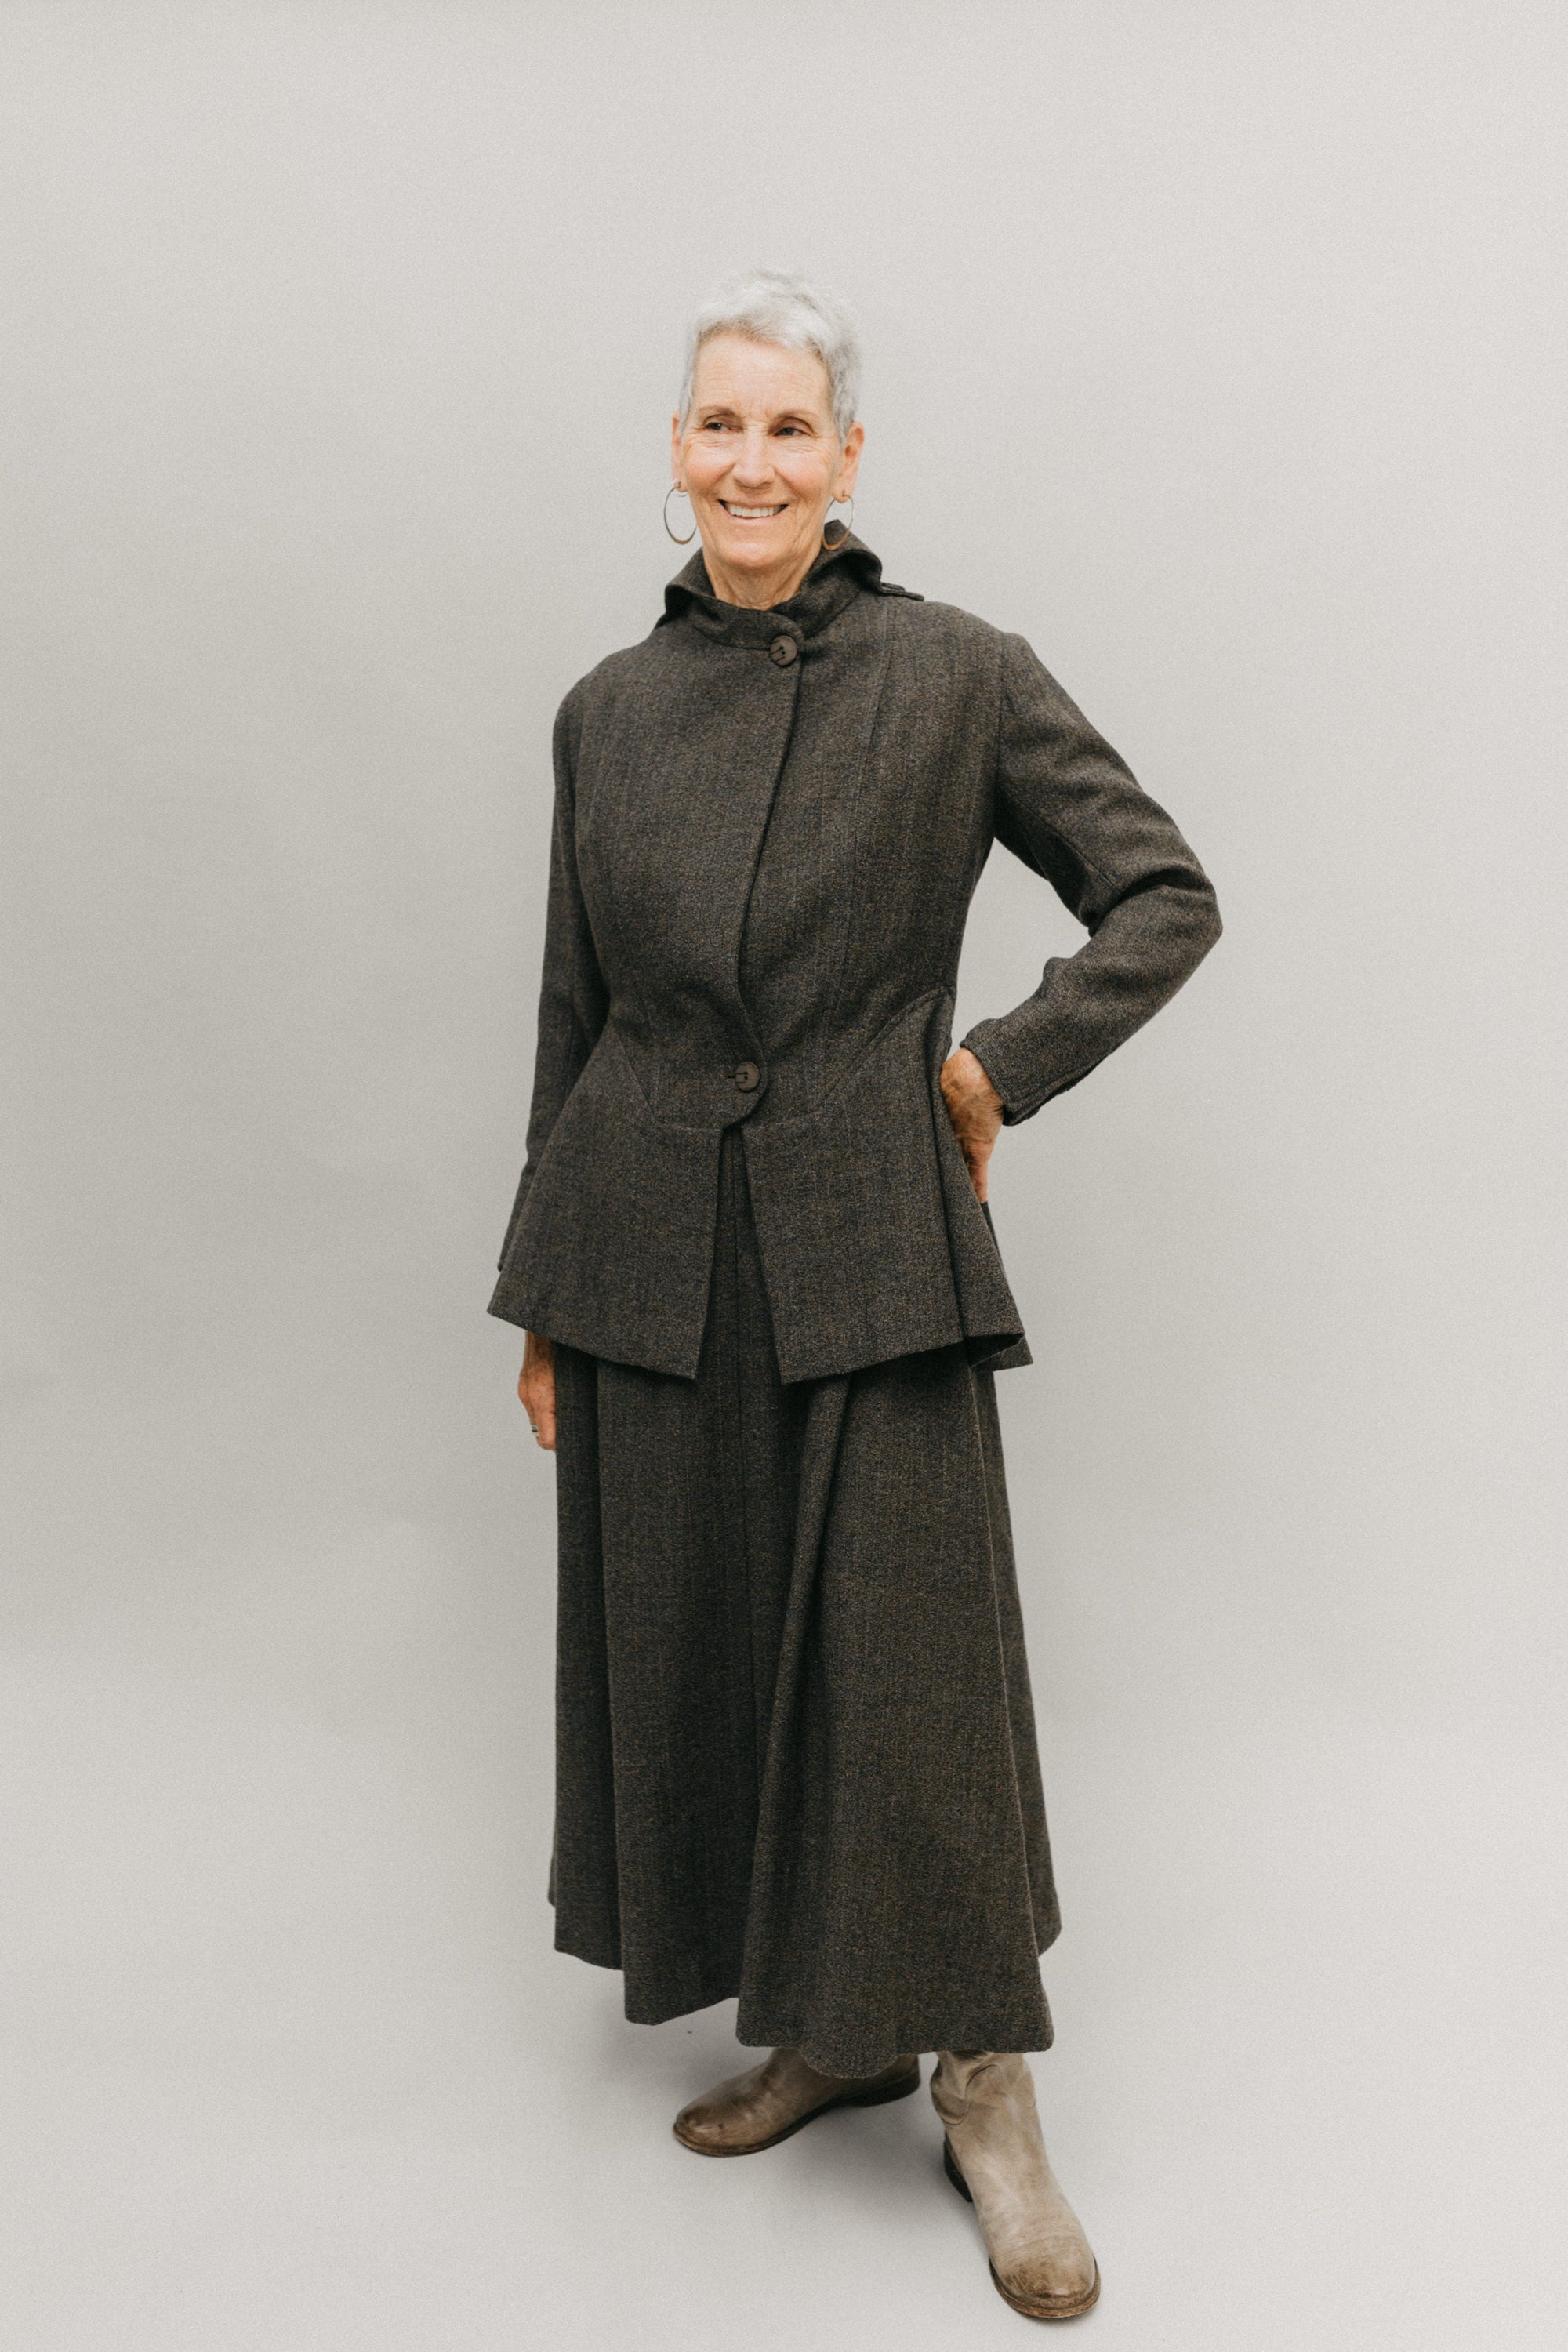 Older white woman smiling, standing her left hand on her hip, in front of a studio white backdrop wearing the 508 traveling suit buttoned